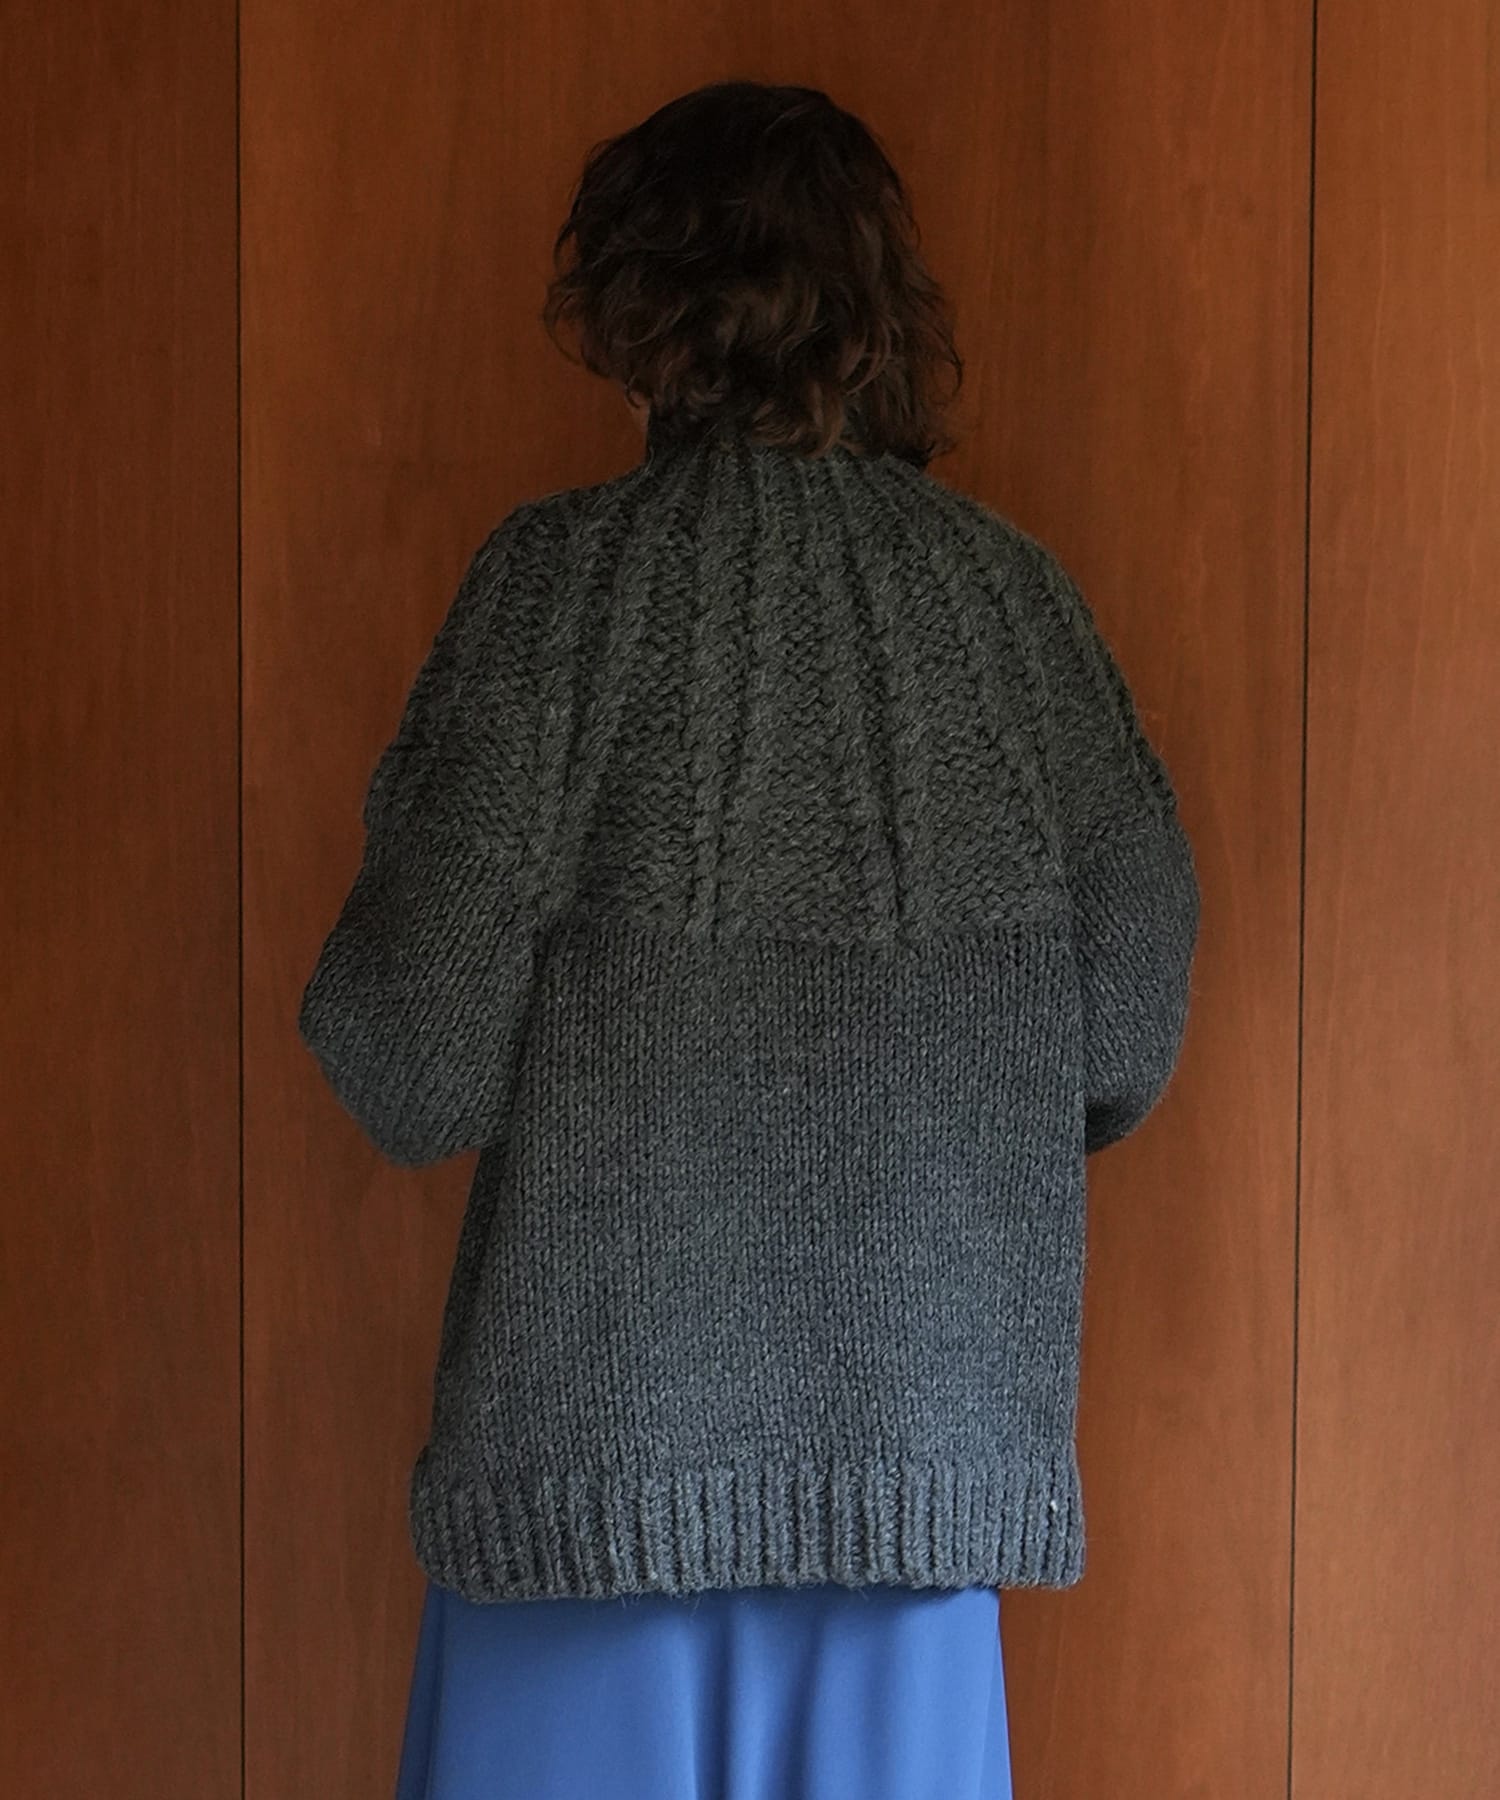 Cable Trim Chunky Hand Knit Cardigan - Retro, Indie and Unique Fashion